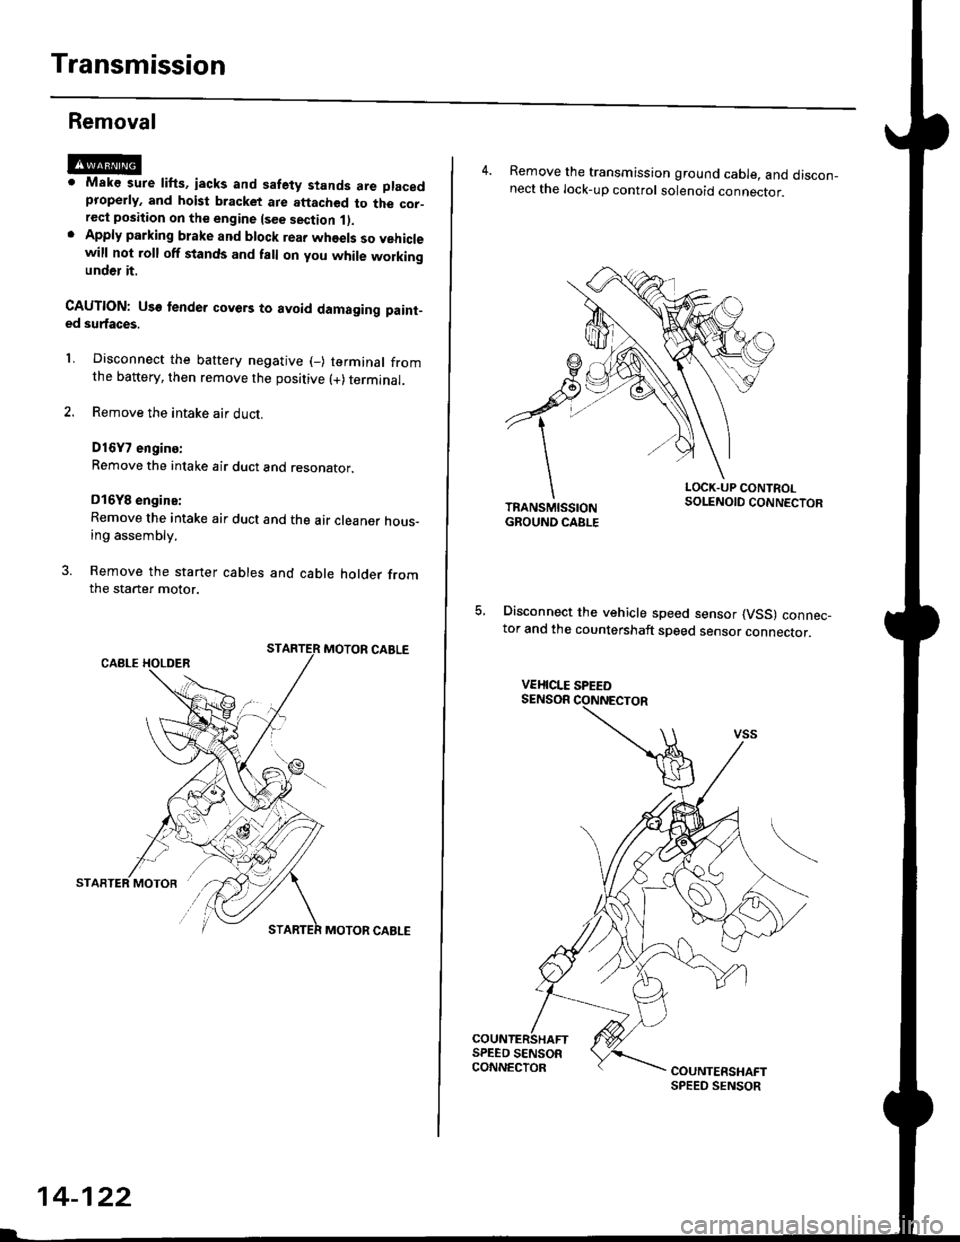 HONDA CIVIC 1999 6.G User Guide Transmission
Removal
@Maks sure lifts, iacks and safety stands are placedproperly, and hoist bracket ate aftached to the cor_rec{ position on the engine lsee section 1).Apply parking brake and block r